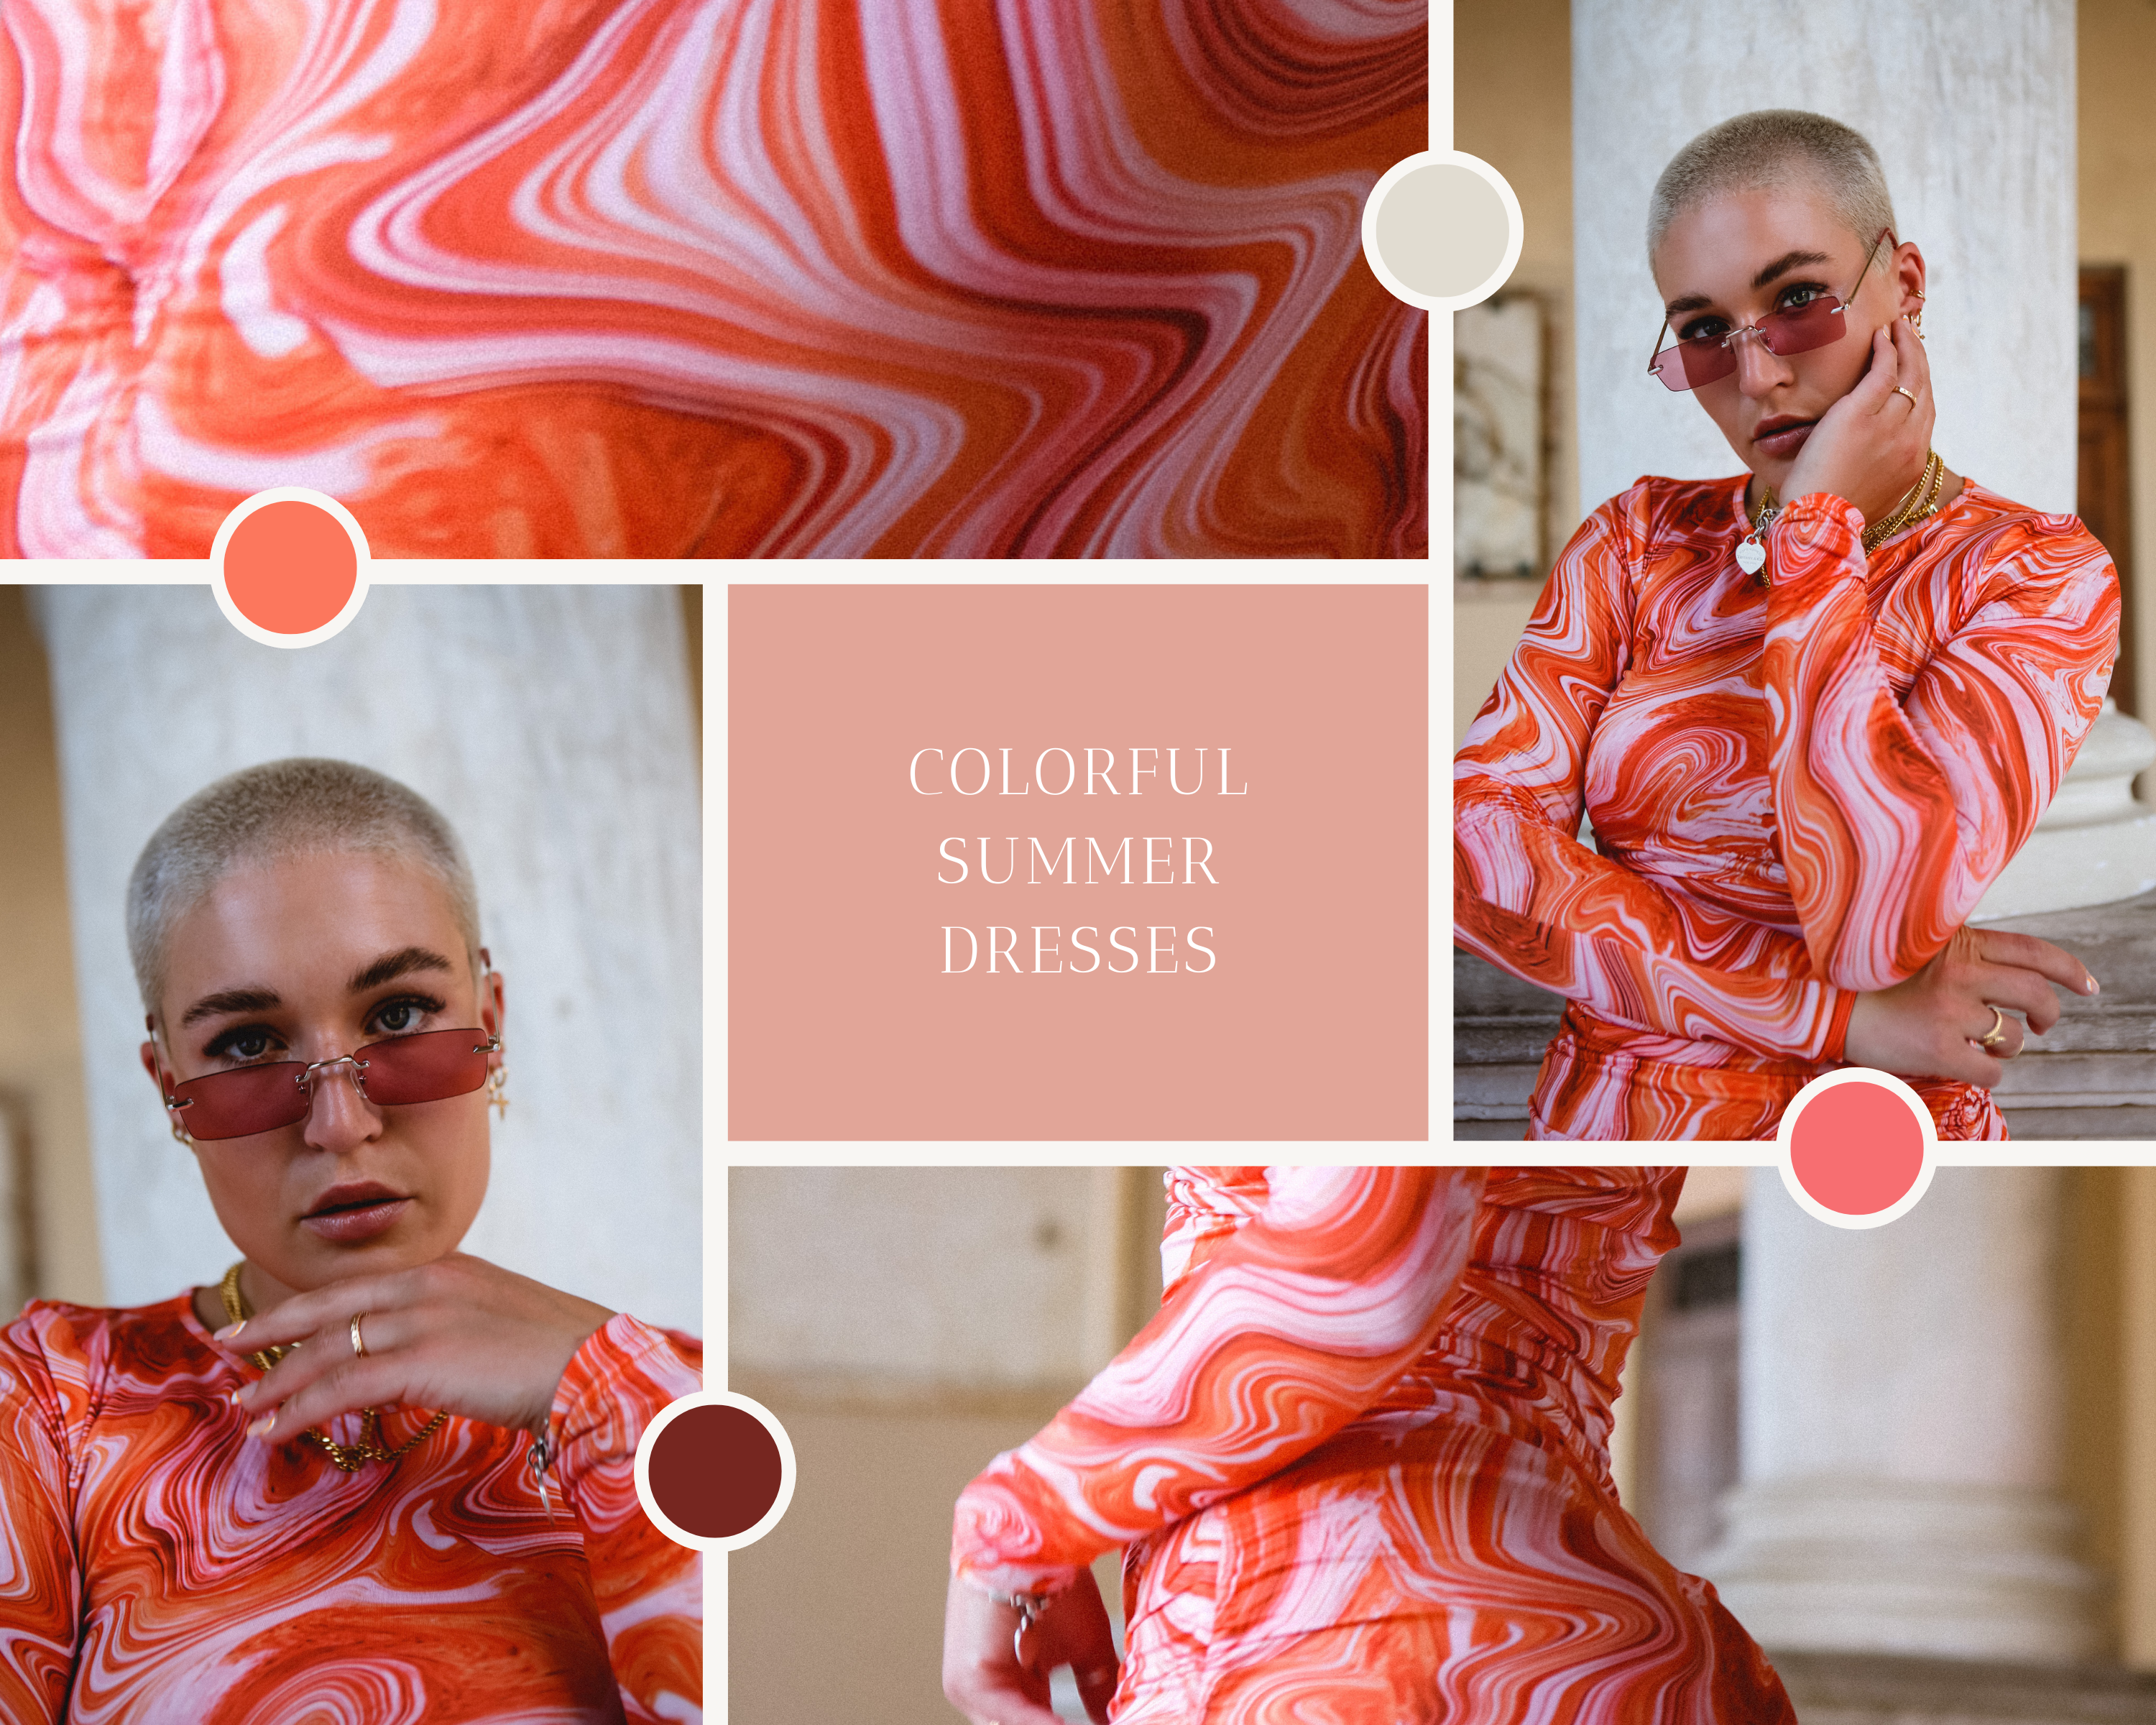 COLORFUL SUMMER DRESSES-SUMMER OUTFITS-SUMMER TREND-SOMMER TREND-VACATION-ITALY